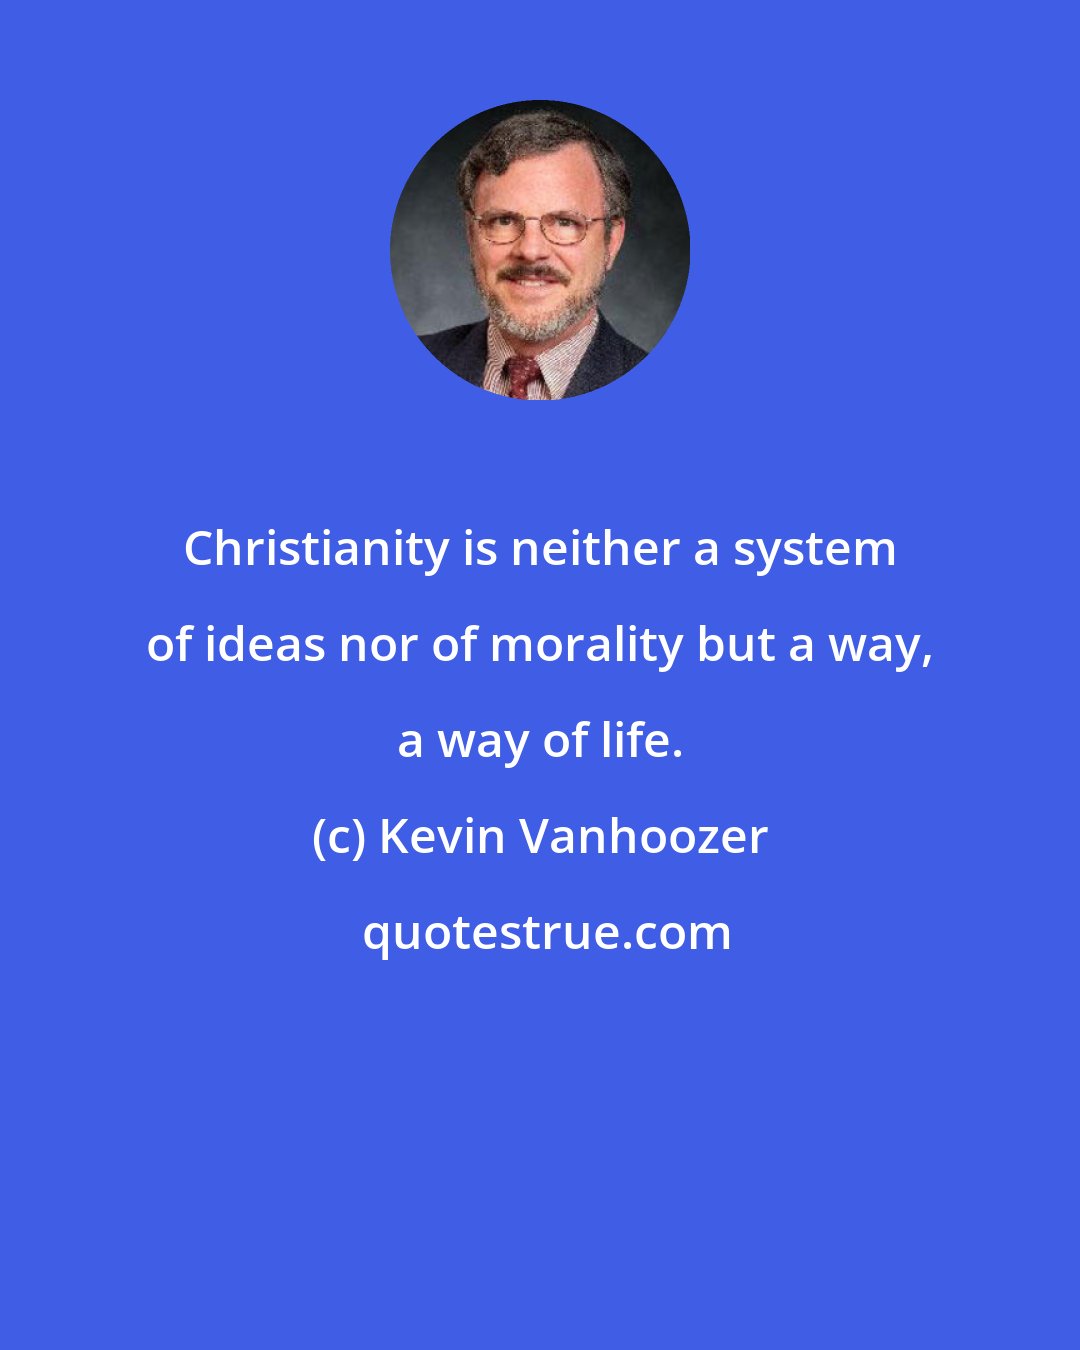 Kevin Vanhoozer: Christianity is neither a system of ideas nor of morality but a way, a way of life.